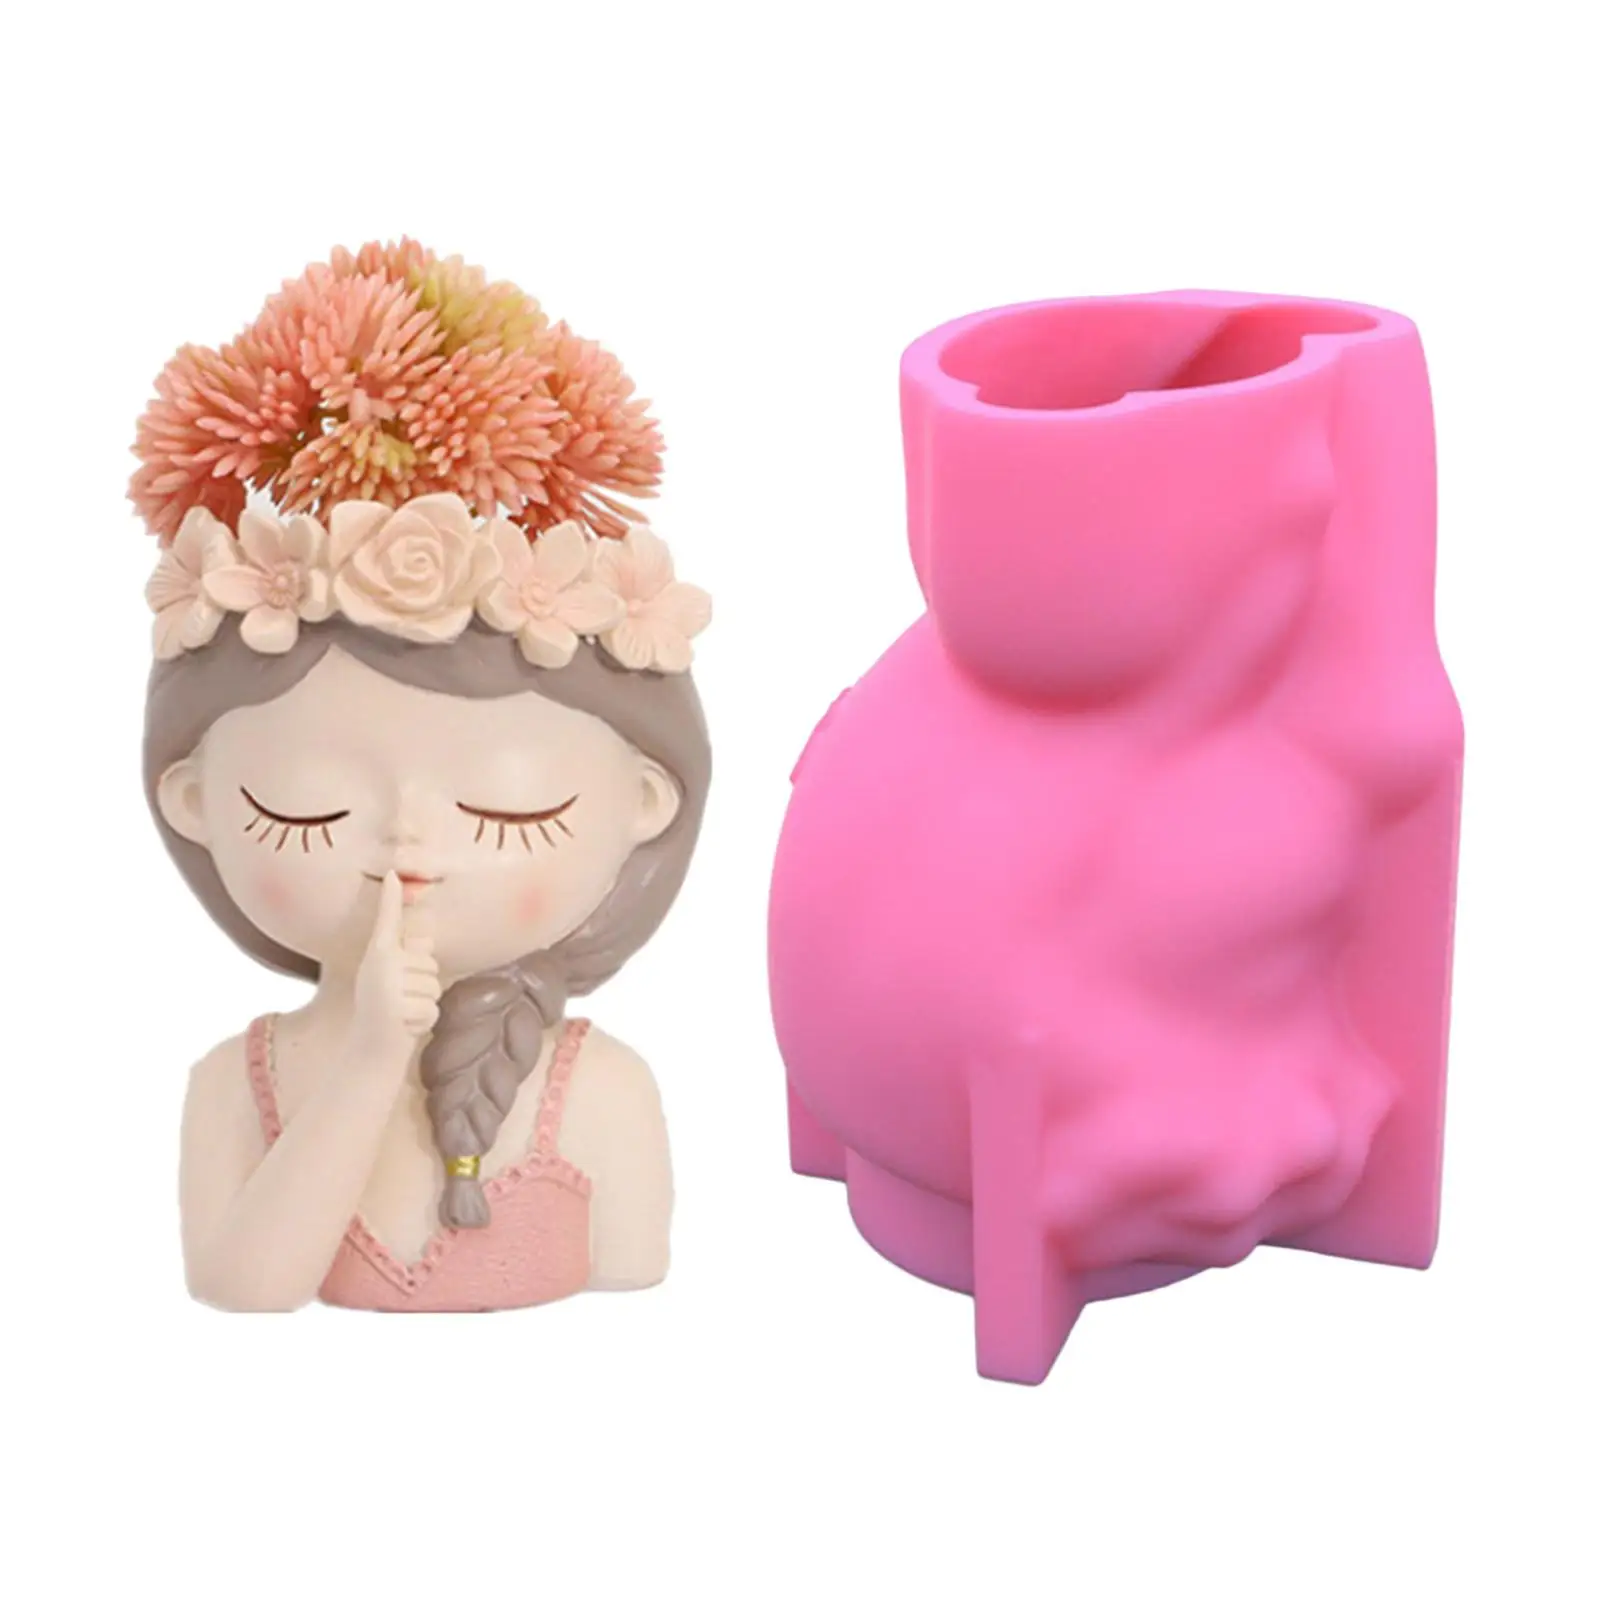 Silicone Mold 3D Girl Flowerpot Gypsum Resin Candle Concrete Crystal Glue Tool DIY Handmade Crafts Ornaments